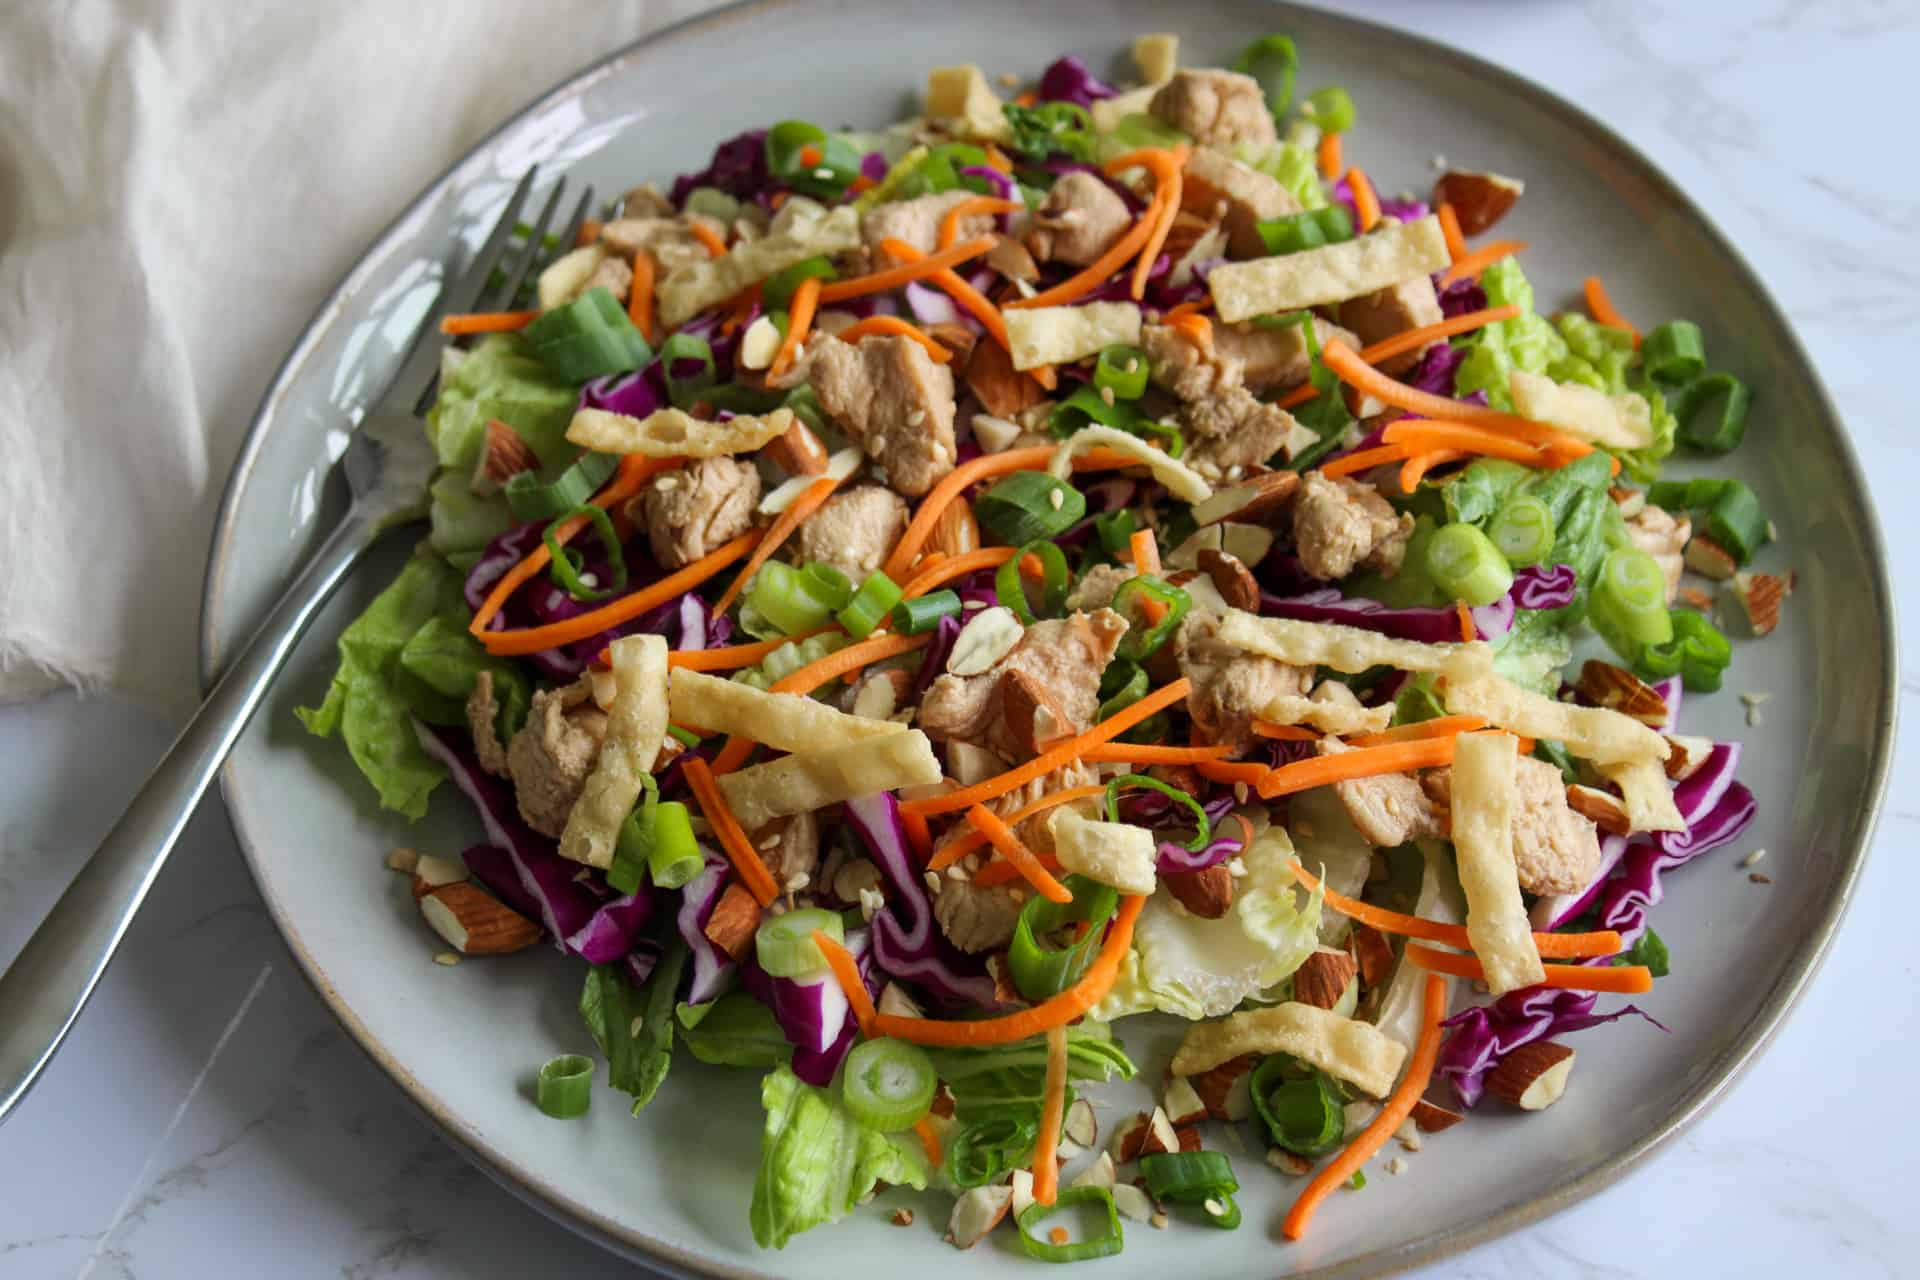 A Panera inspired Asian chicken salad on a plate